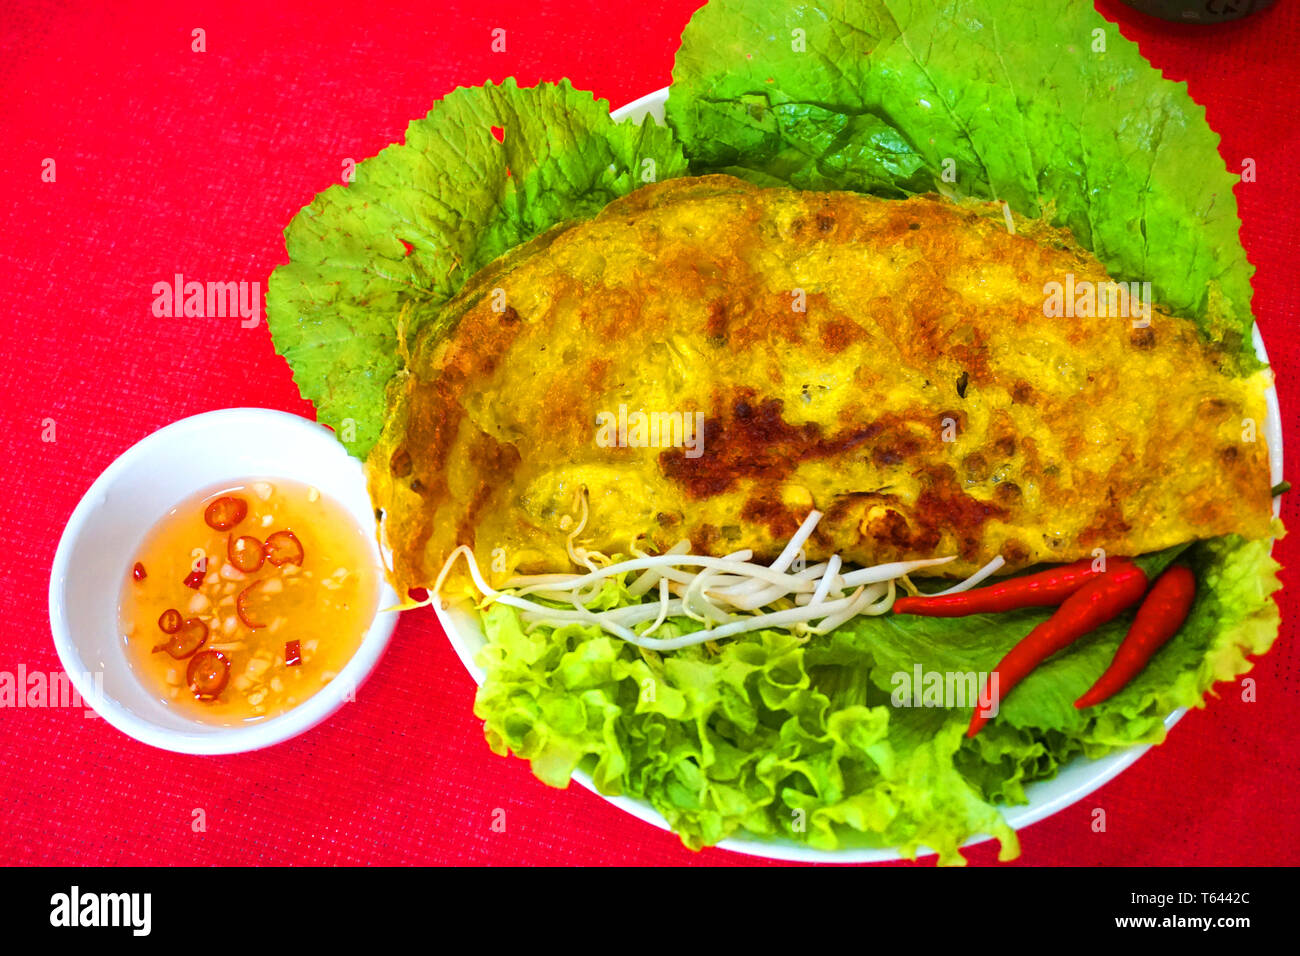 Banh xeo - Vietnamese traditional street food yellow crispy rice flour cake with mushroom shrimp mung bean sprout sizzling cake with fish sauce chilli Stock Photo